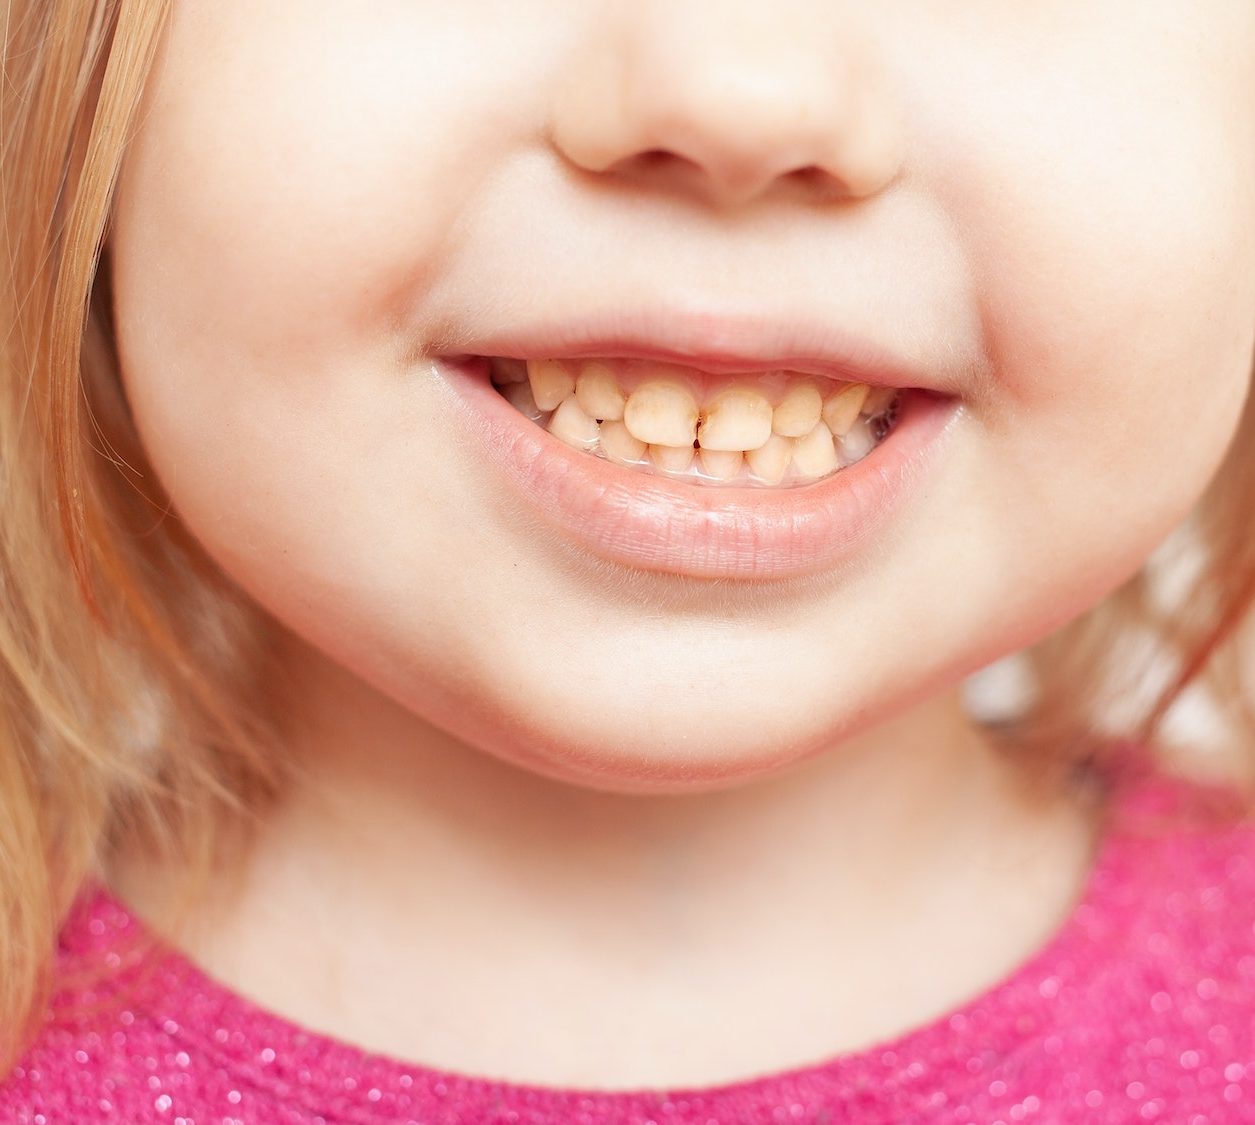 person smiles, shows teeth, yellow plaque, crooked teeth, malocclusion. childhood diseases